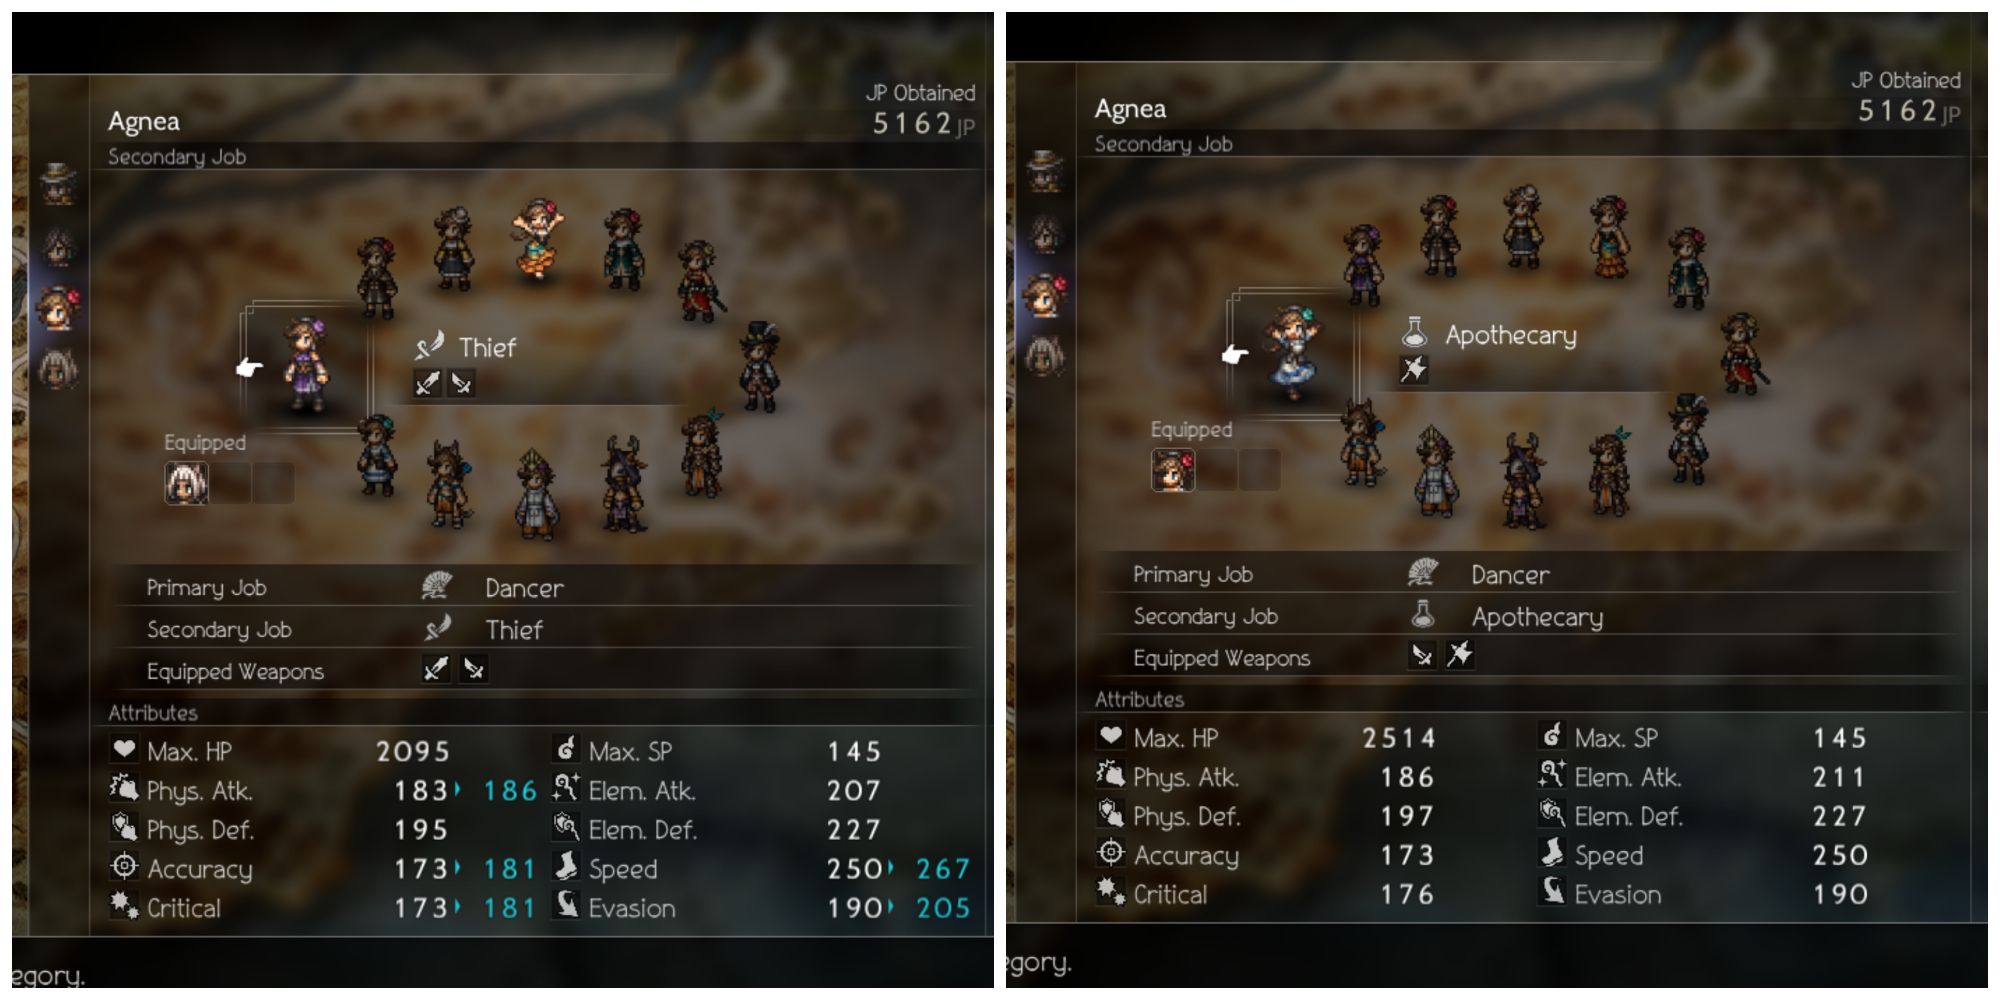 Agnea'S Side Job Options In Octopath Traveler 2 Thief And Apothecary